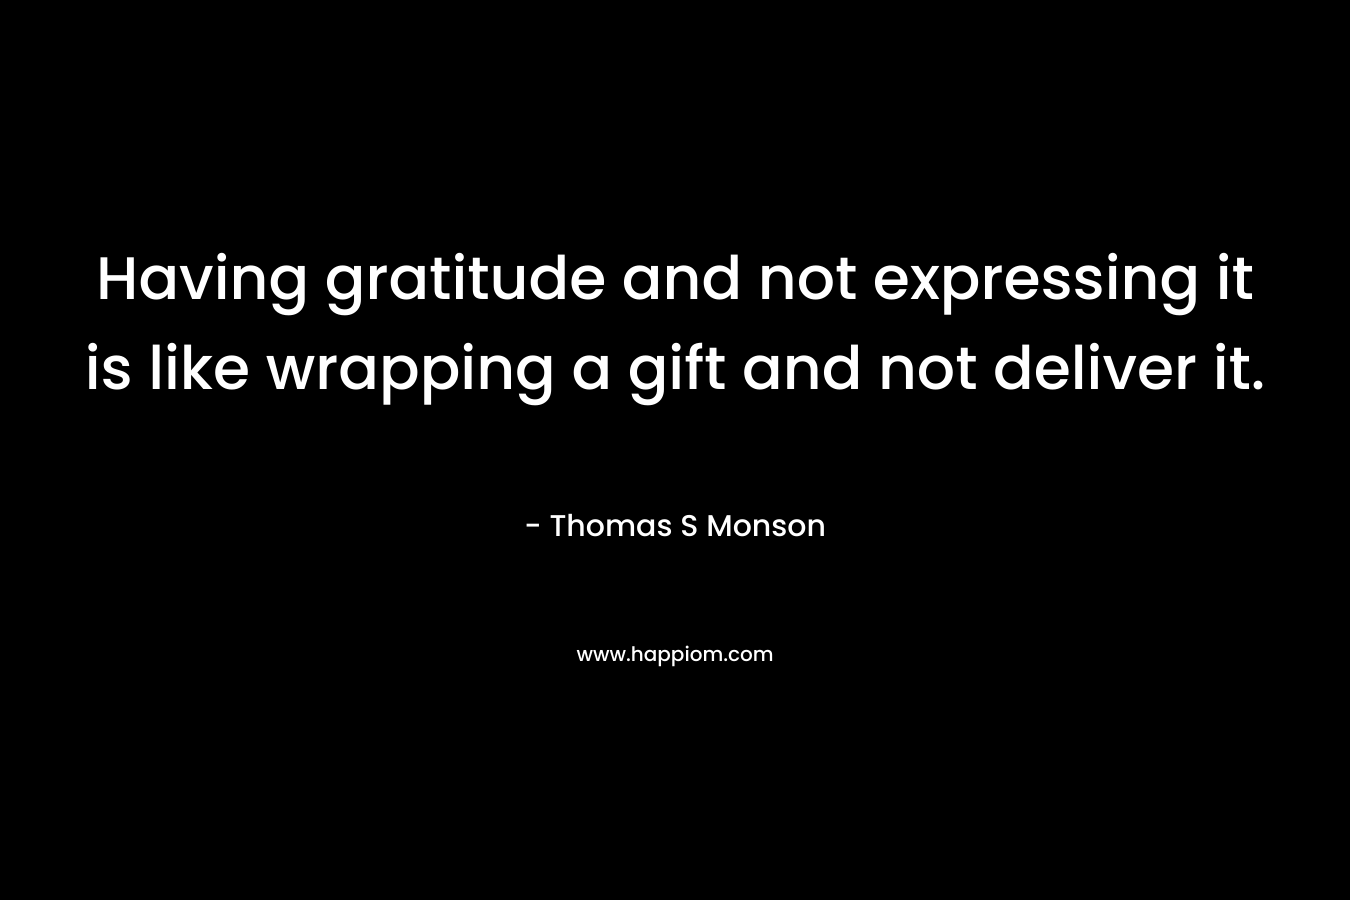 Having gratitude and not expressing it is like wrapping a gift and not deliver it. – Thomas S Monson